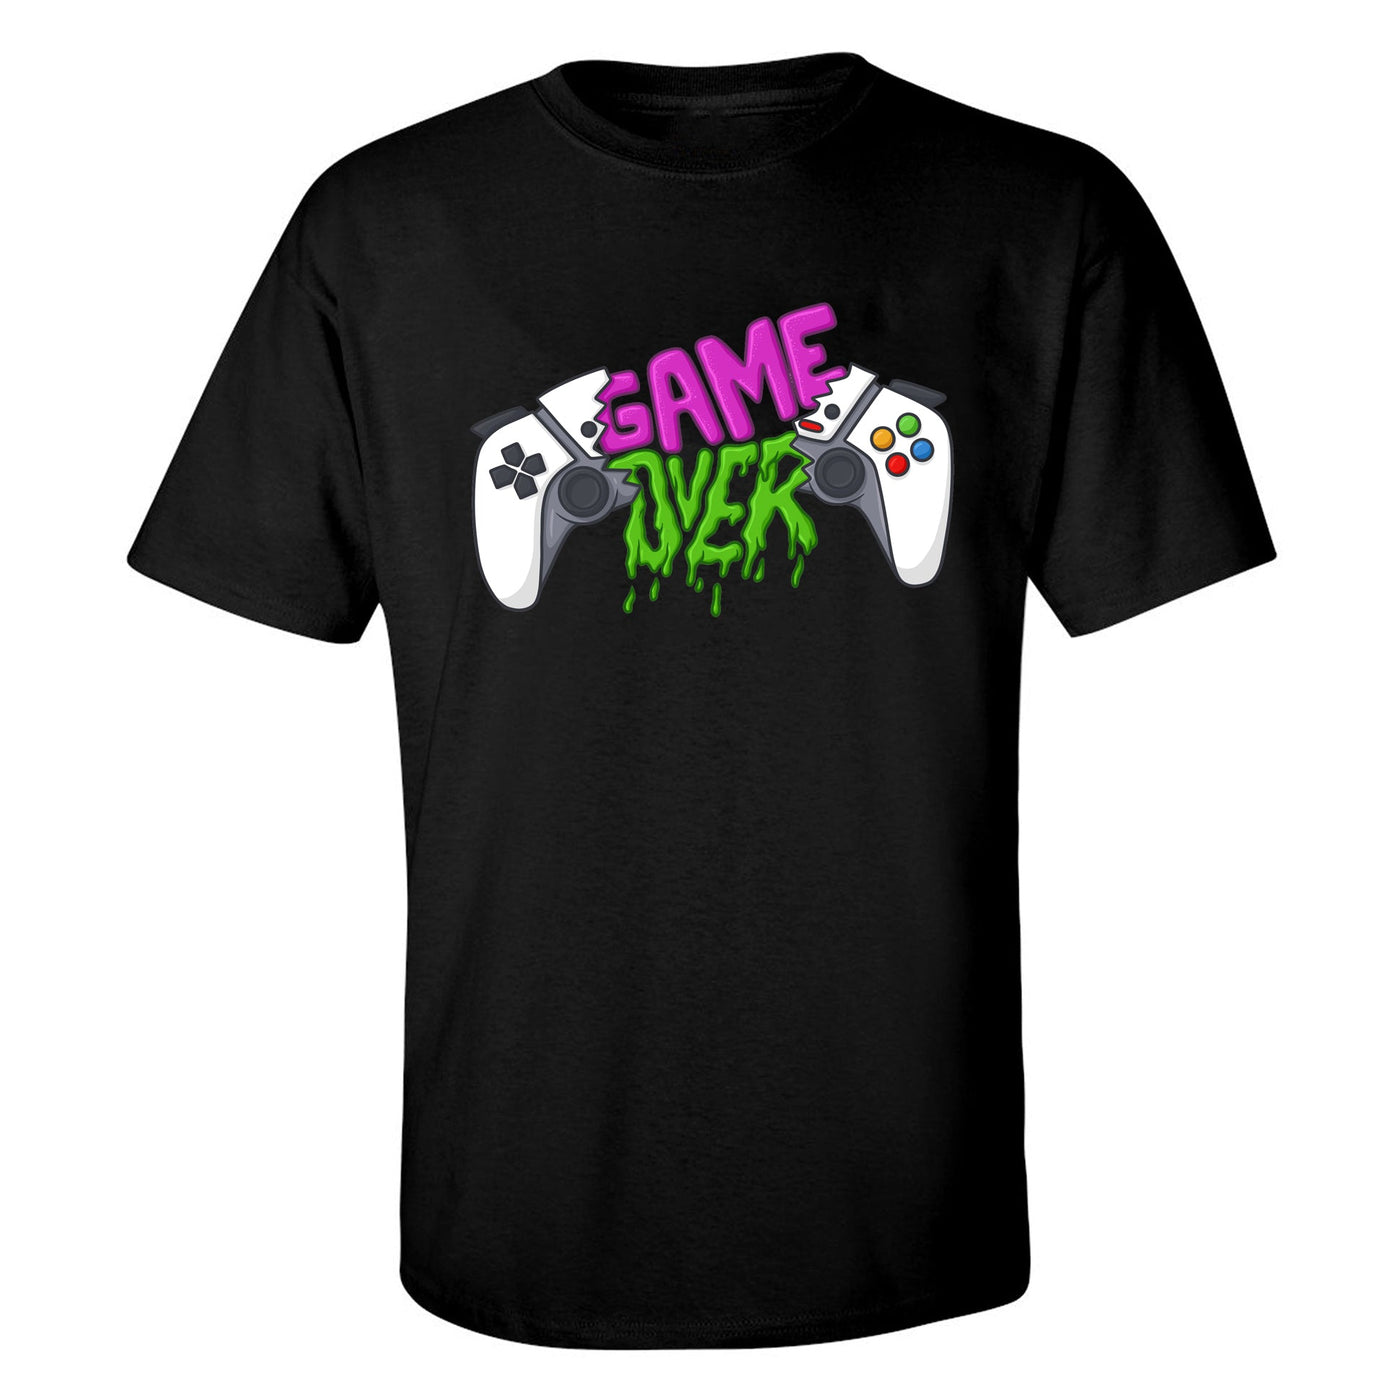 "Game Over" Short Sleeve T-Shirt